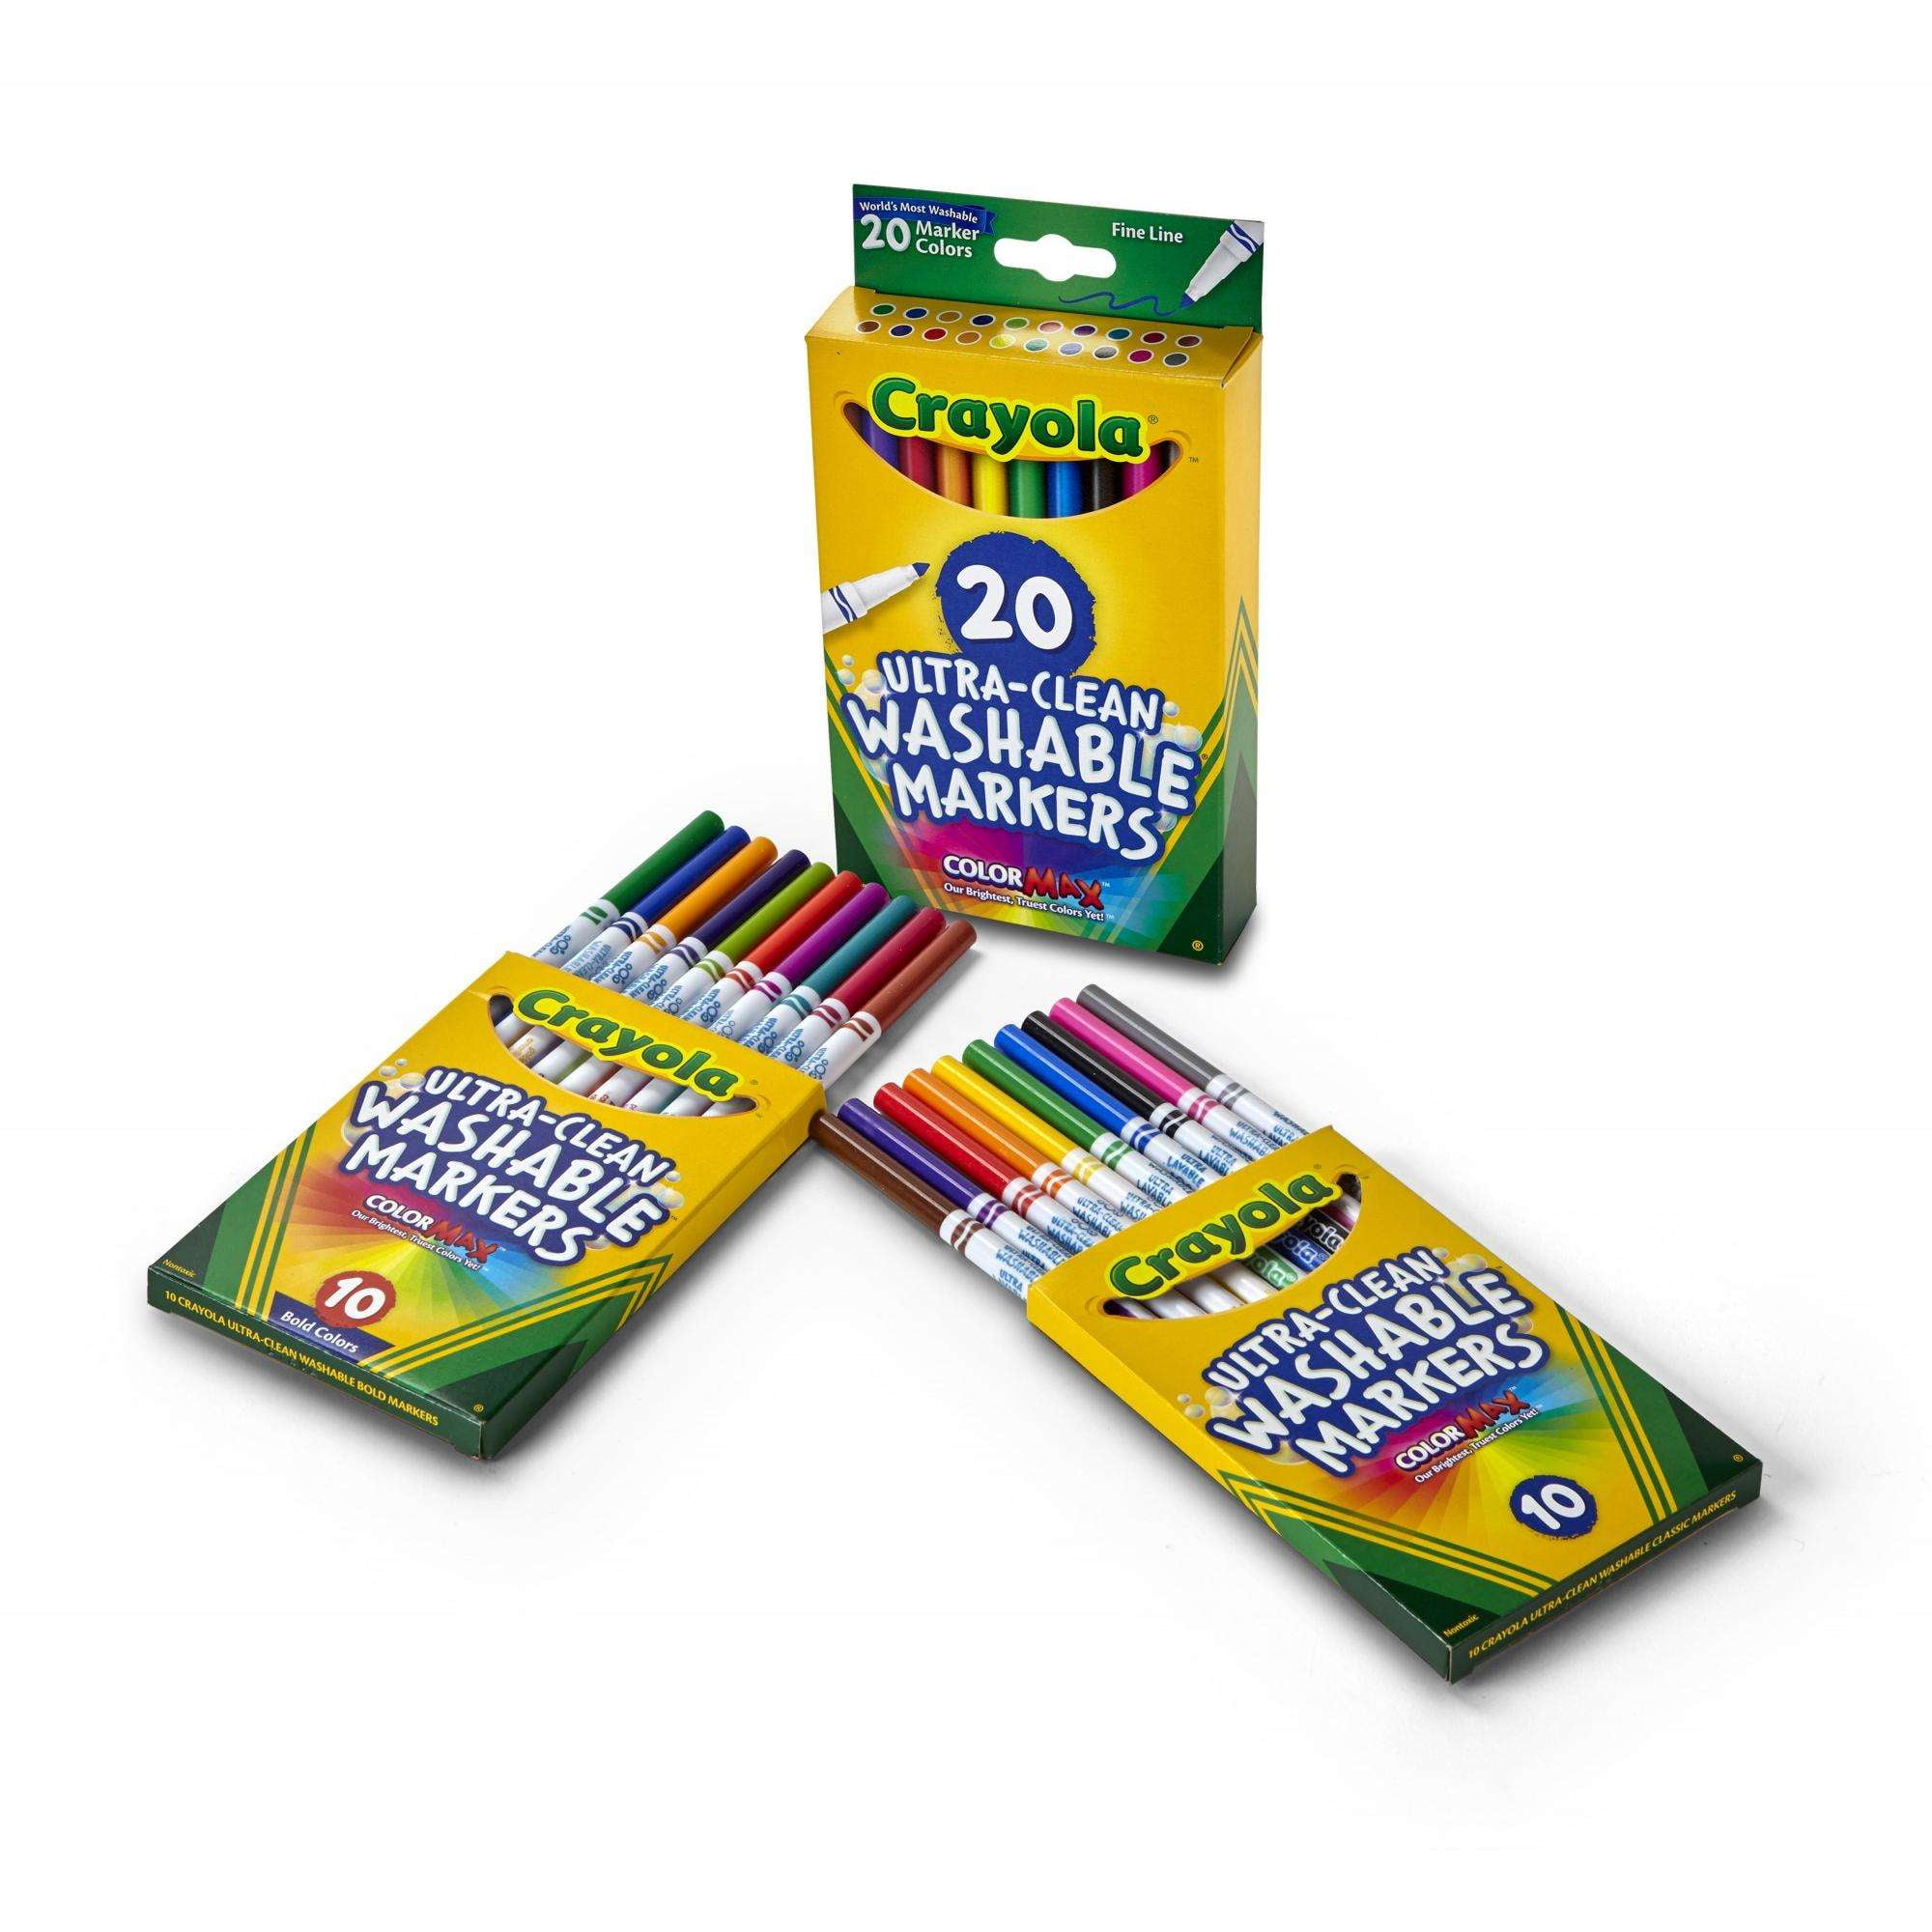 Crayola Ultra-Clean Washable Fine Line Markers, Back to School Supplies,  Teacher Supplies, 20 Ct 